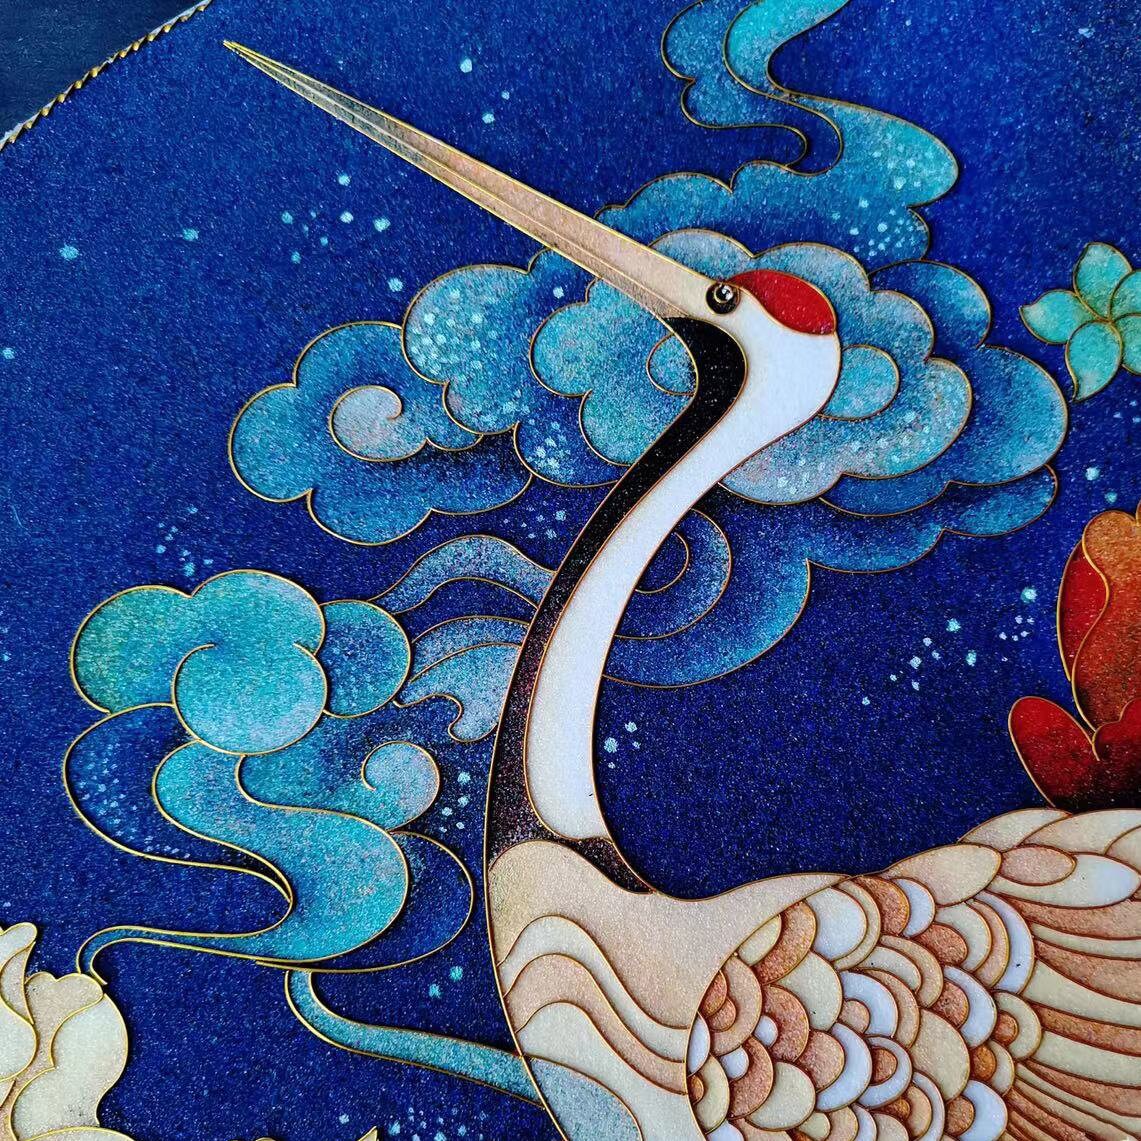  TANZEQI Cloisonne Enamel Painting DIY Kit for Chinese Cloisonné  Enamel Art of Crane and Scenery, Intangible Cultural Heritage (Crane C):  Wall Art